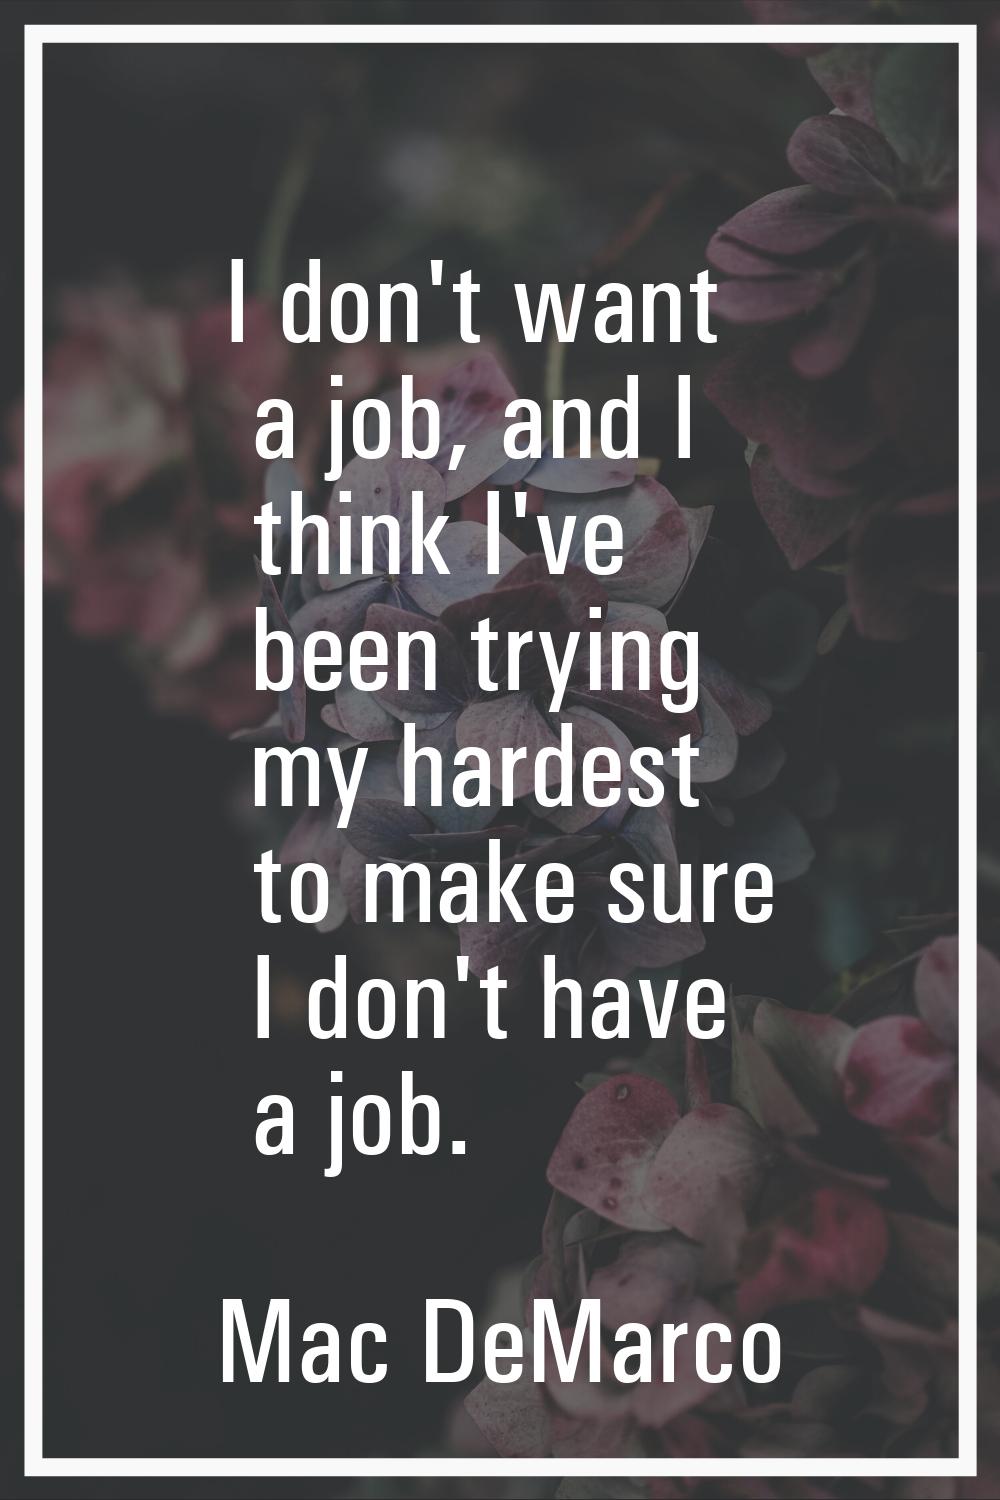 I don't want a job, and I think I've been trying my hardest to make sure I don't have a job.